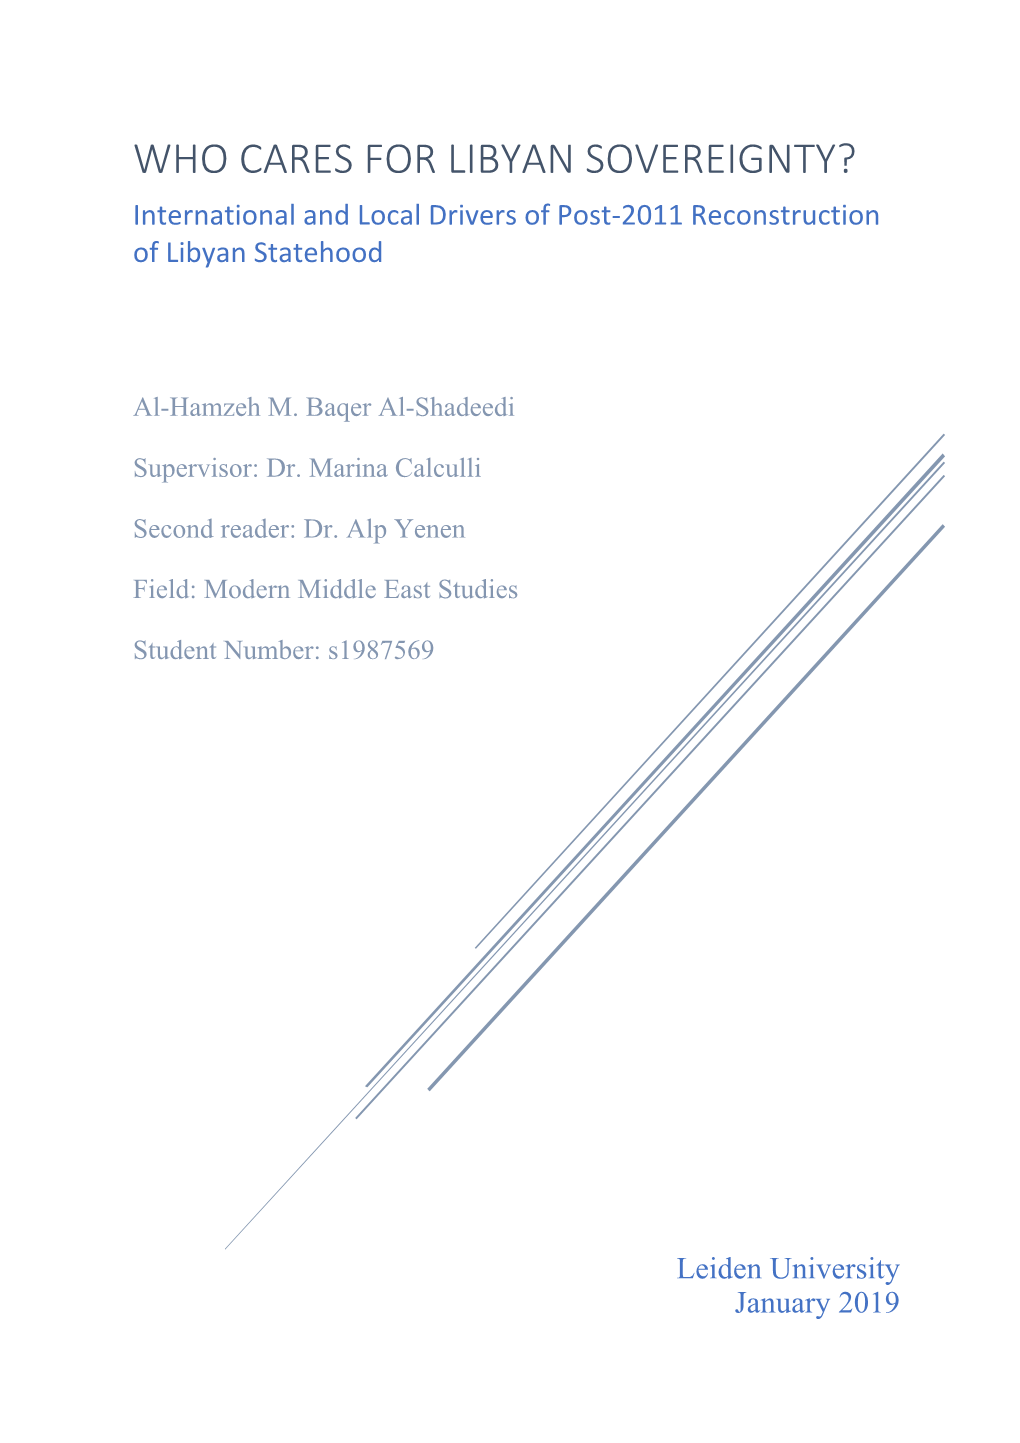 WHO CARES for LIBYAN SOVEREIGNTY? International and Local Drivers of Post-2011 Reconstruction of Libyan Statehood